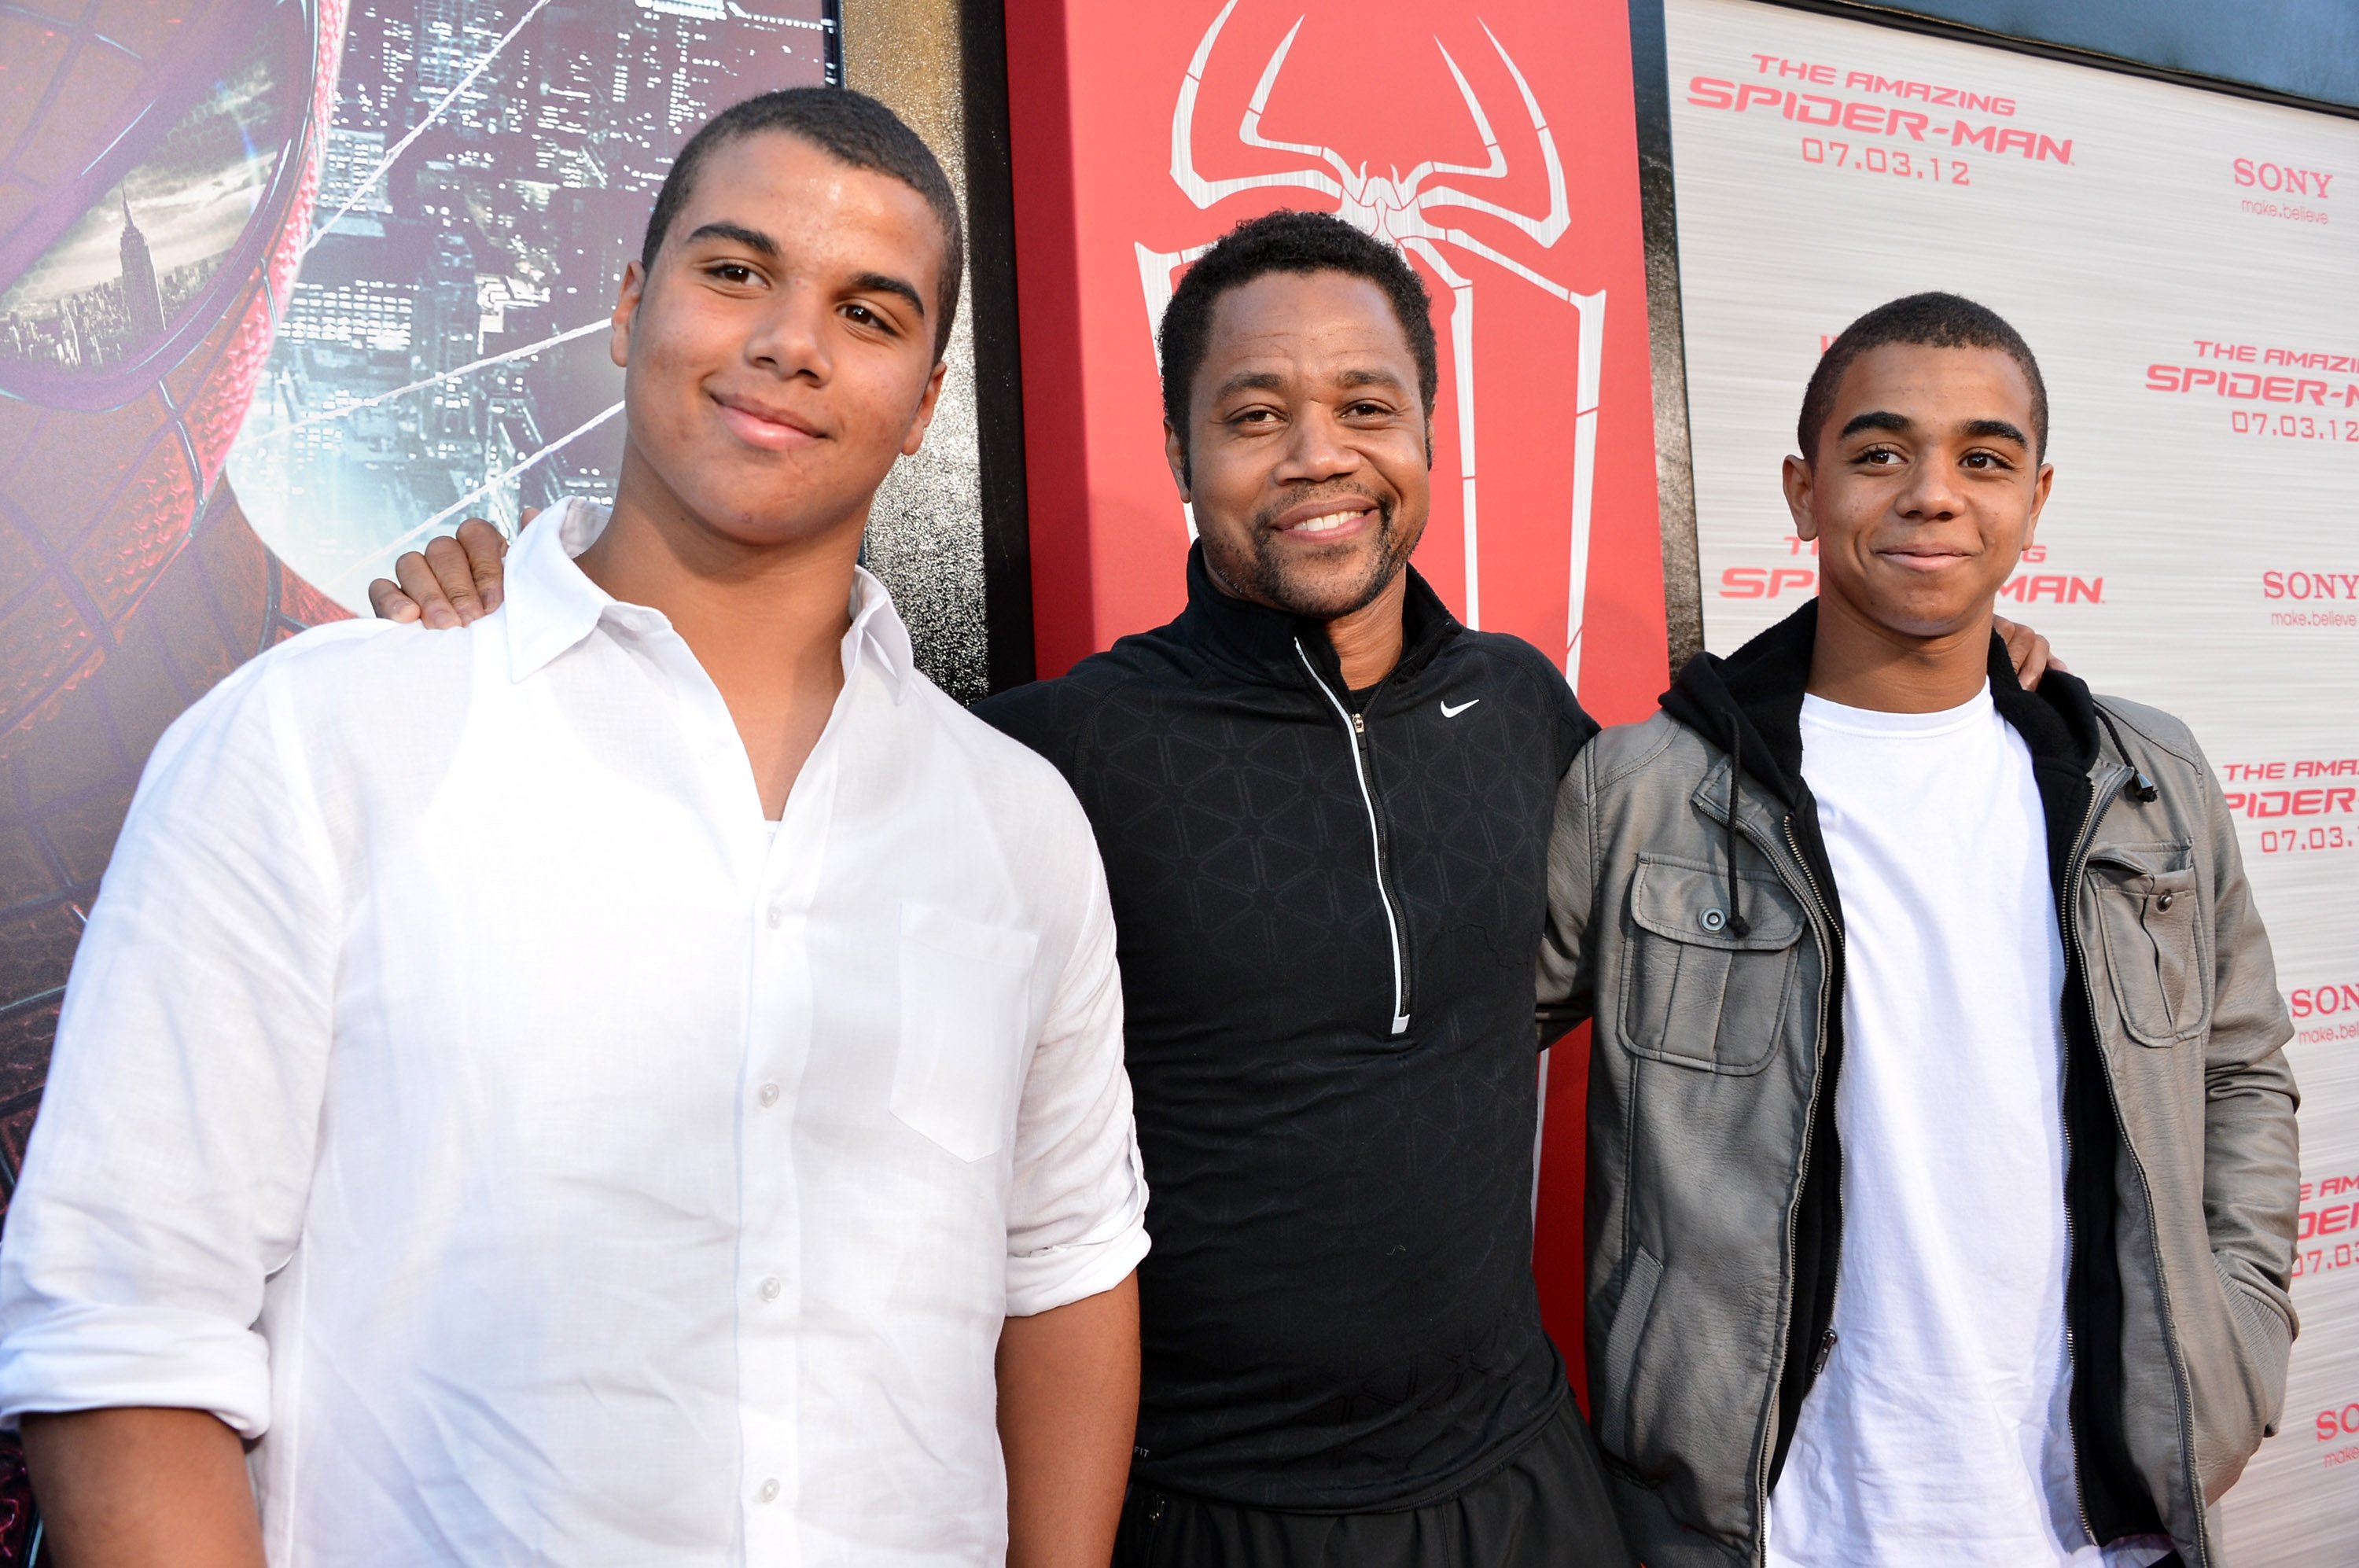  Mason Gooding, Cuba Gooding Jr., and Spencer Gooding arrive at the premiere of Columbia Pictures' "The Amazing Spider-Man", 2012. | Photo: GettyImages